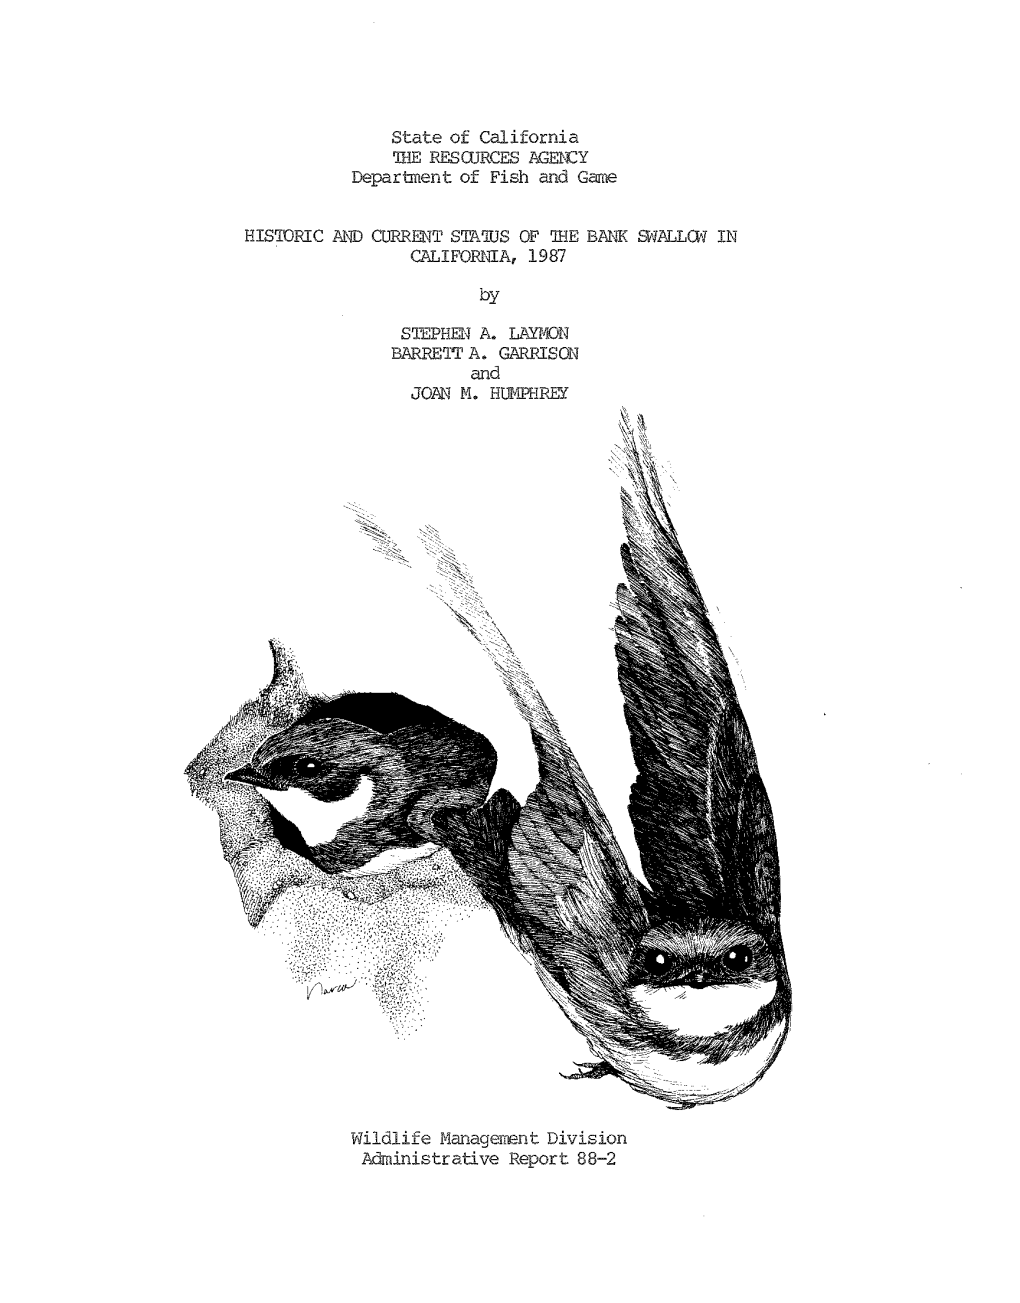 HISTORIC and CURRENT STATUS of the BANK SWALLOW in CALIFORNIA, 1987 By